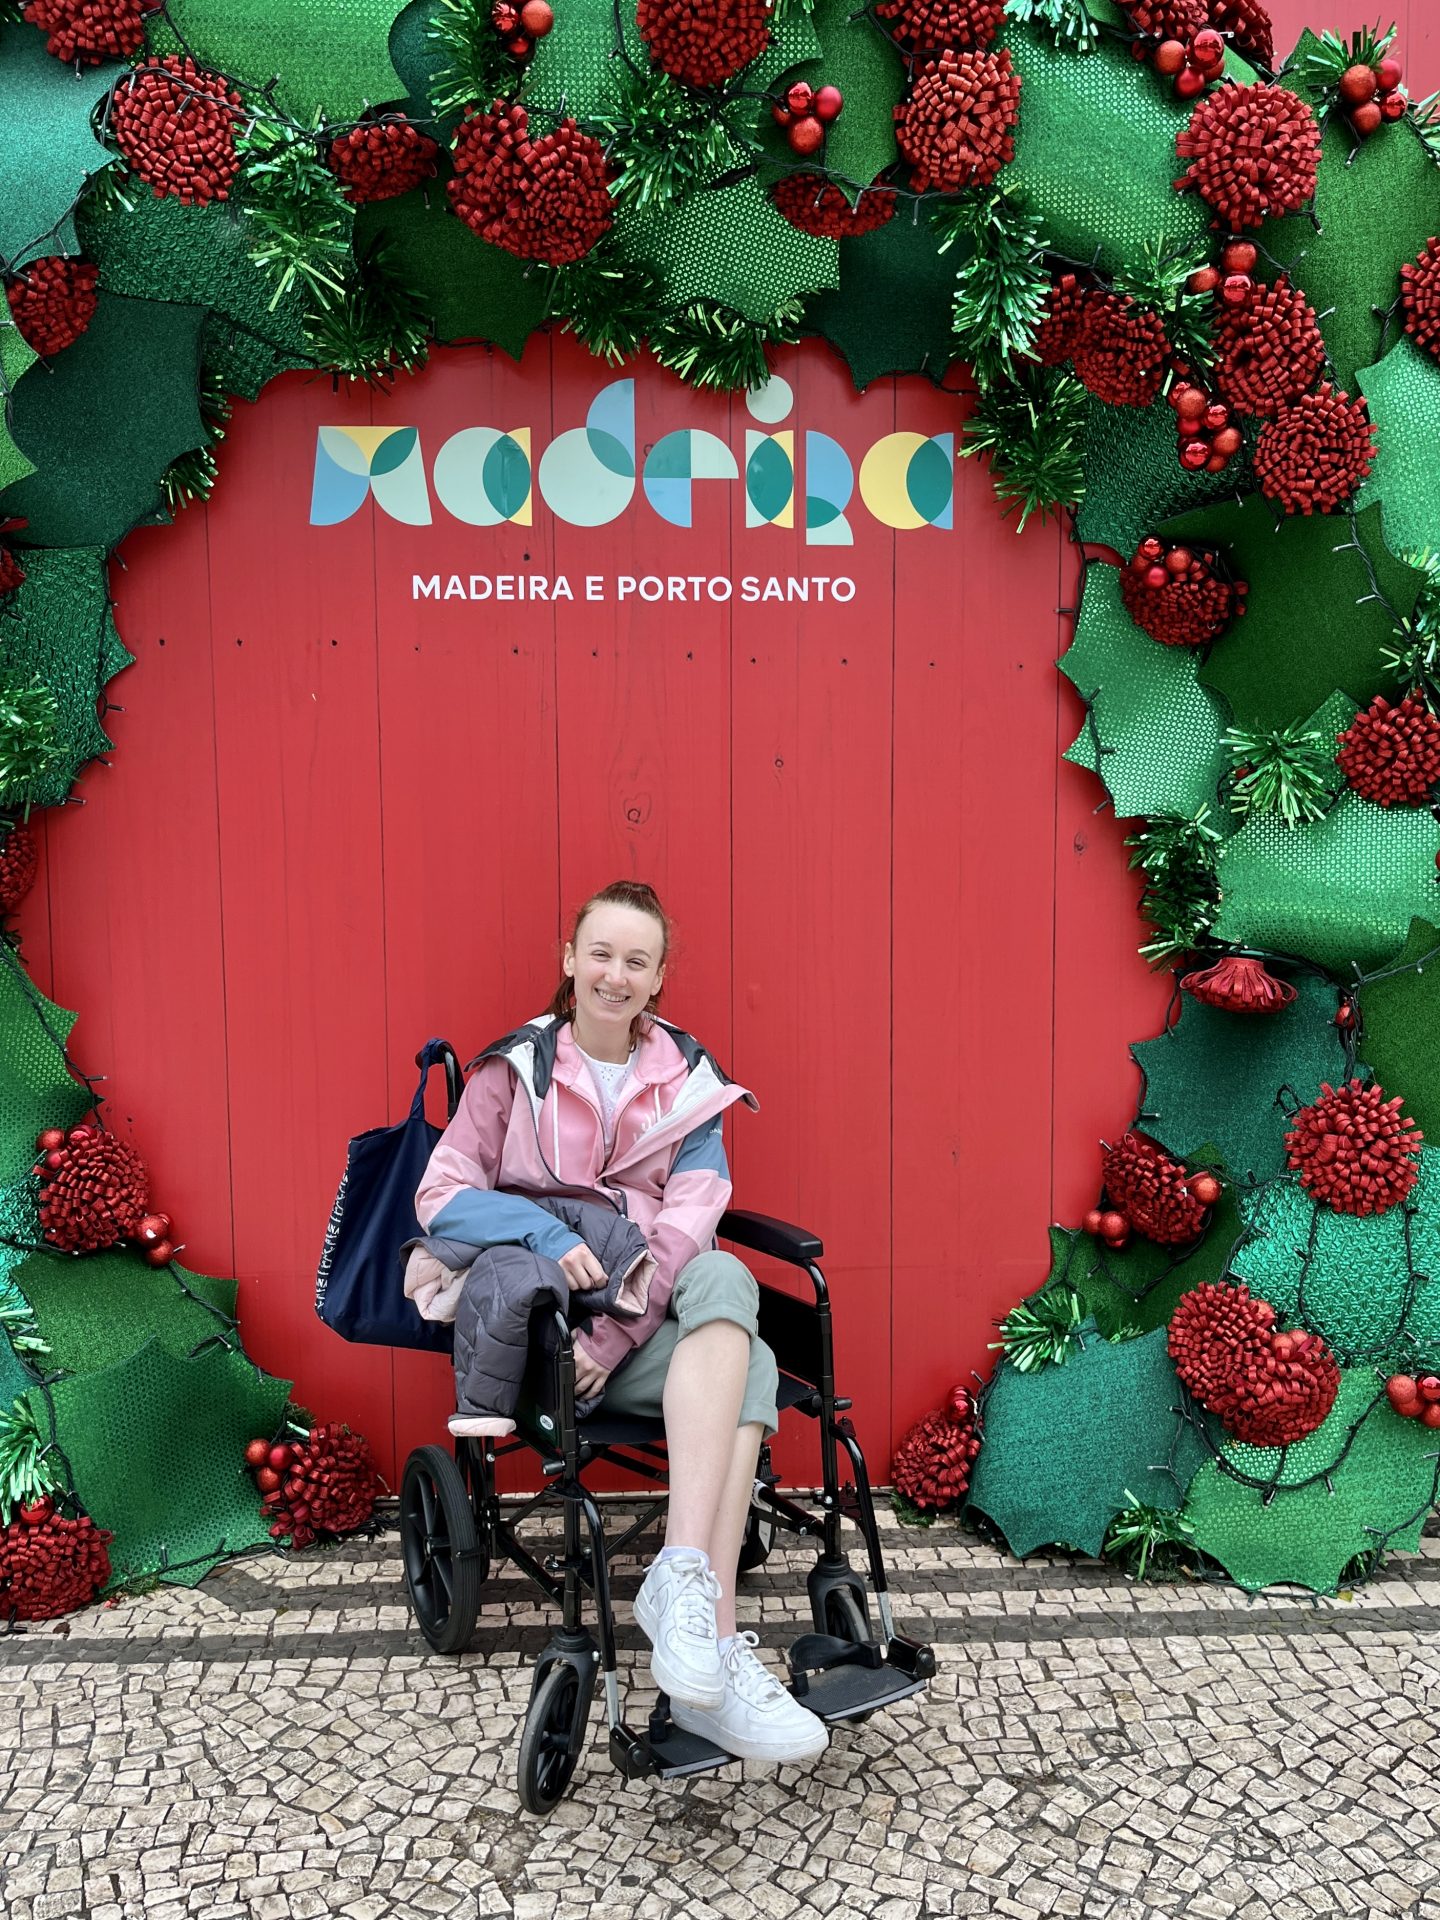 Pippa in her transit wheelchair on land in Madeira, in front of a festive photo board surrounded by a green wreath. Pippa has one leg crossed and is smiling, wearing a pink and blue raincoat and cropped khaki trousers